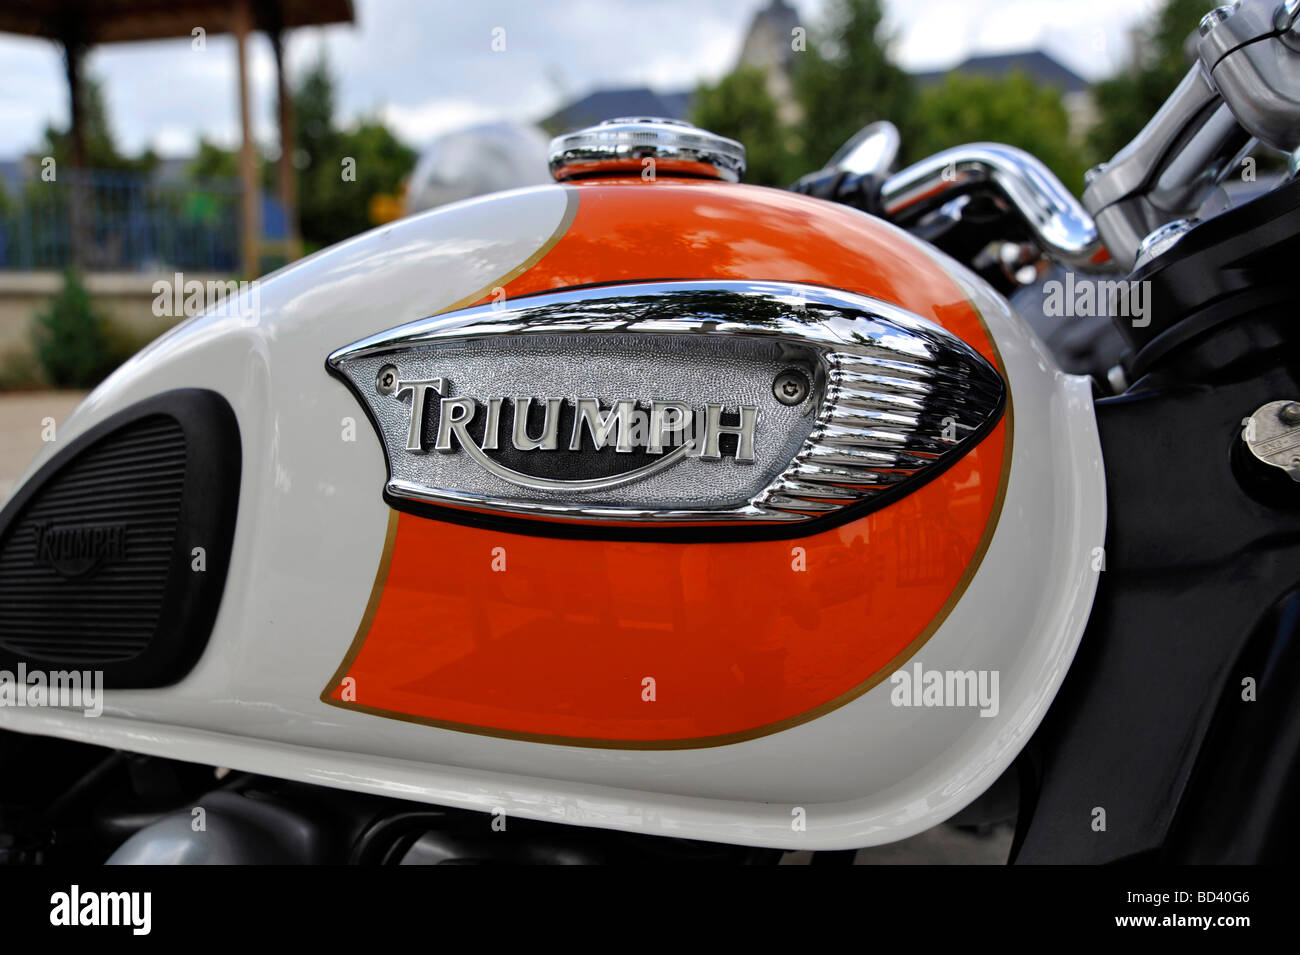 Closeup shot of petrol tank on an old classic Triumph motorcycle Stock Photo